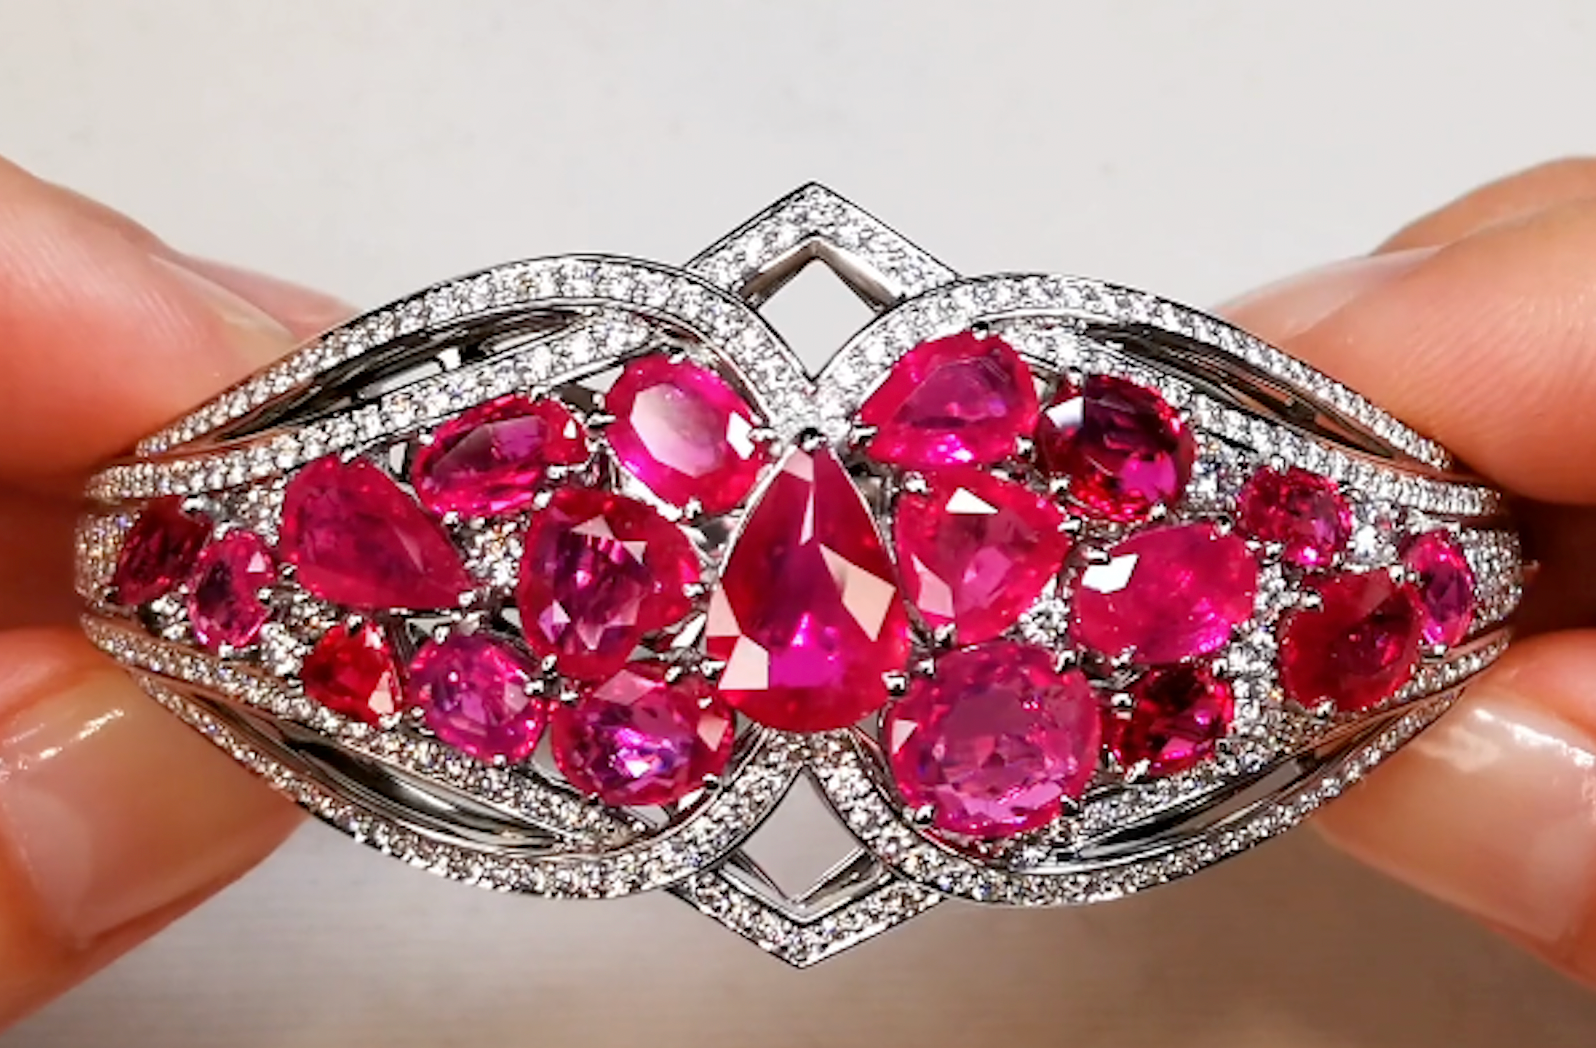 17.34ct Unheated Balas Ruby Bangle with D Flawless Diamonds set in 18K White Gold